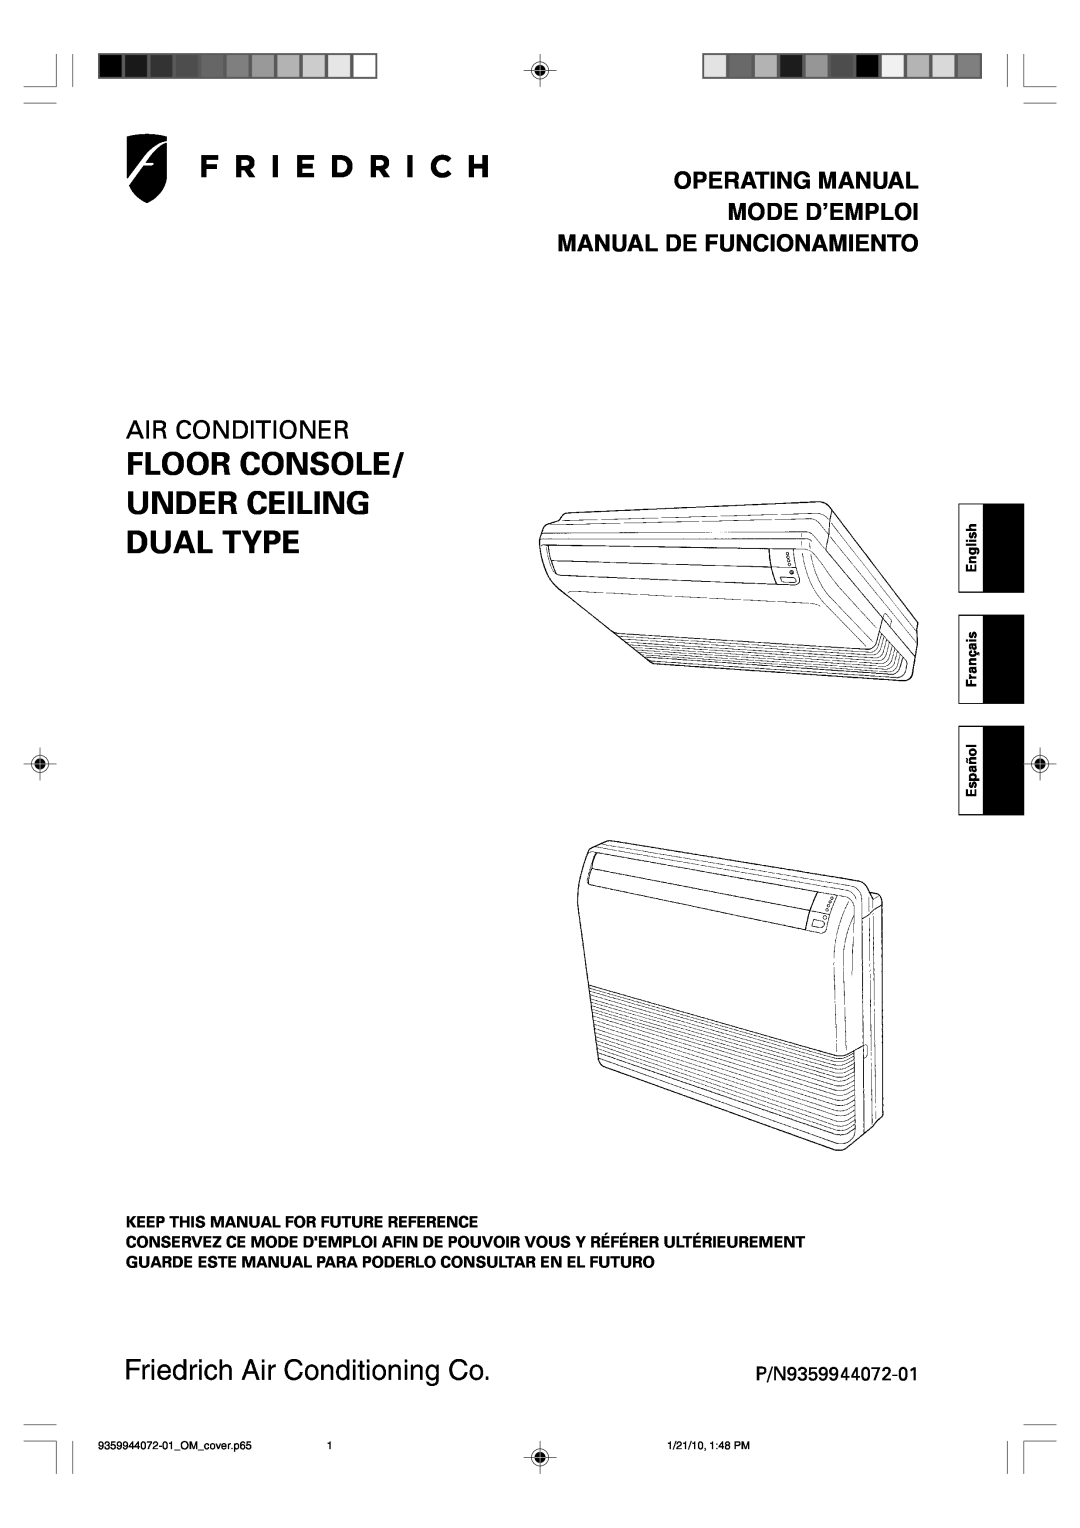 Friedrich P/N9359944072-01 manual Floor Console/ Under Ceiling Dual Type, Air Conditioner, Operating Manual Mode D’Emploi 